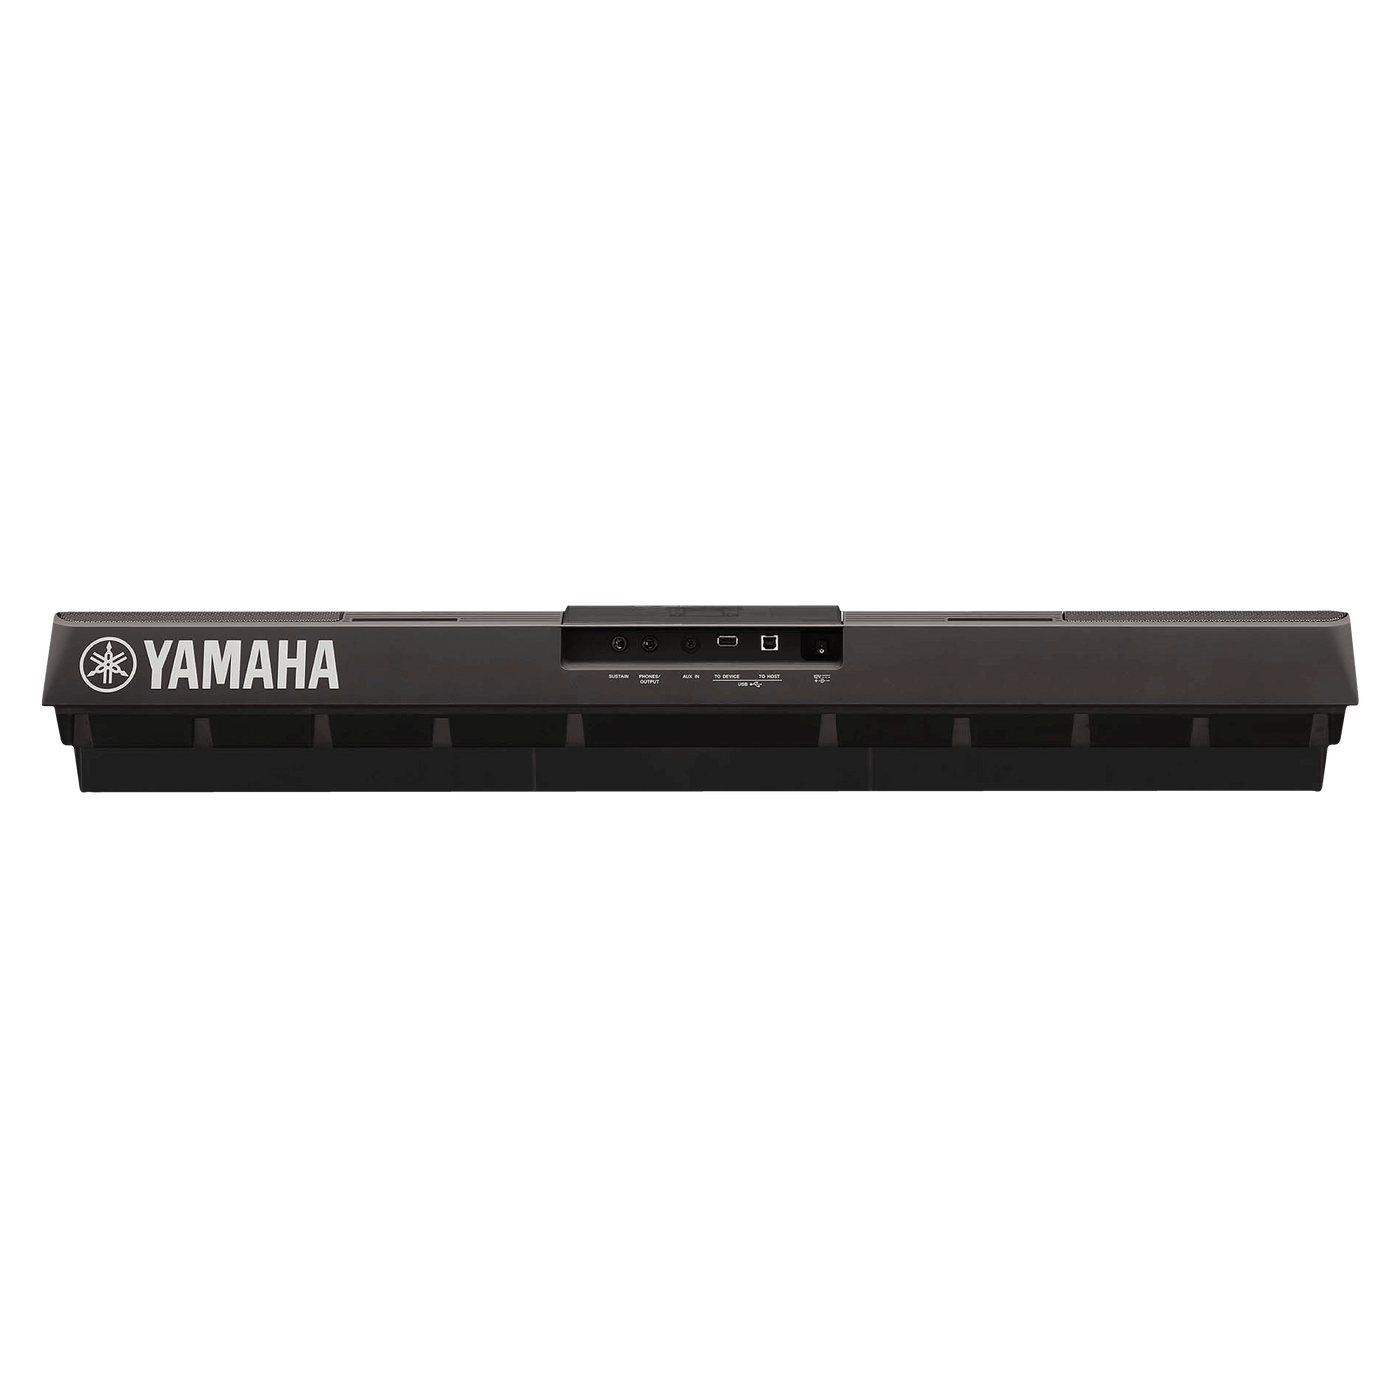 Yamaha PSR-E463 - $439990 - Gearhub - The PSR-E463 is the best entry keyboard for performing various styles of music, from the latest to vinyl favorites. It has a 61-key touch response keyboard with powerful on-board speakers and easy-to-use professional features like assignable Live Control knobs, Quick Sampling, Groove Creator and USB Audio Recorder. Información detallada del producto aquí Teclas • Cantidad: 61 • Tipo: Organ-style • Sensibilidad: Yes (Soft, Medium, Hard, Fixed) Características Generales •